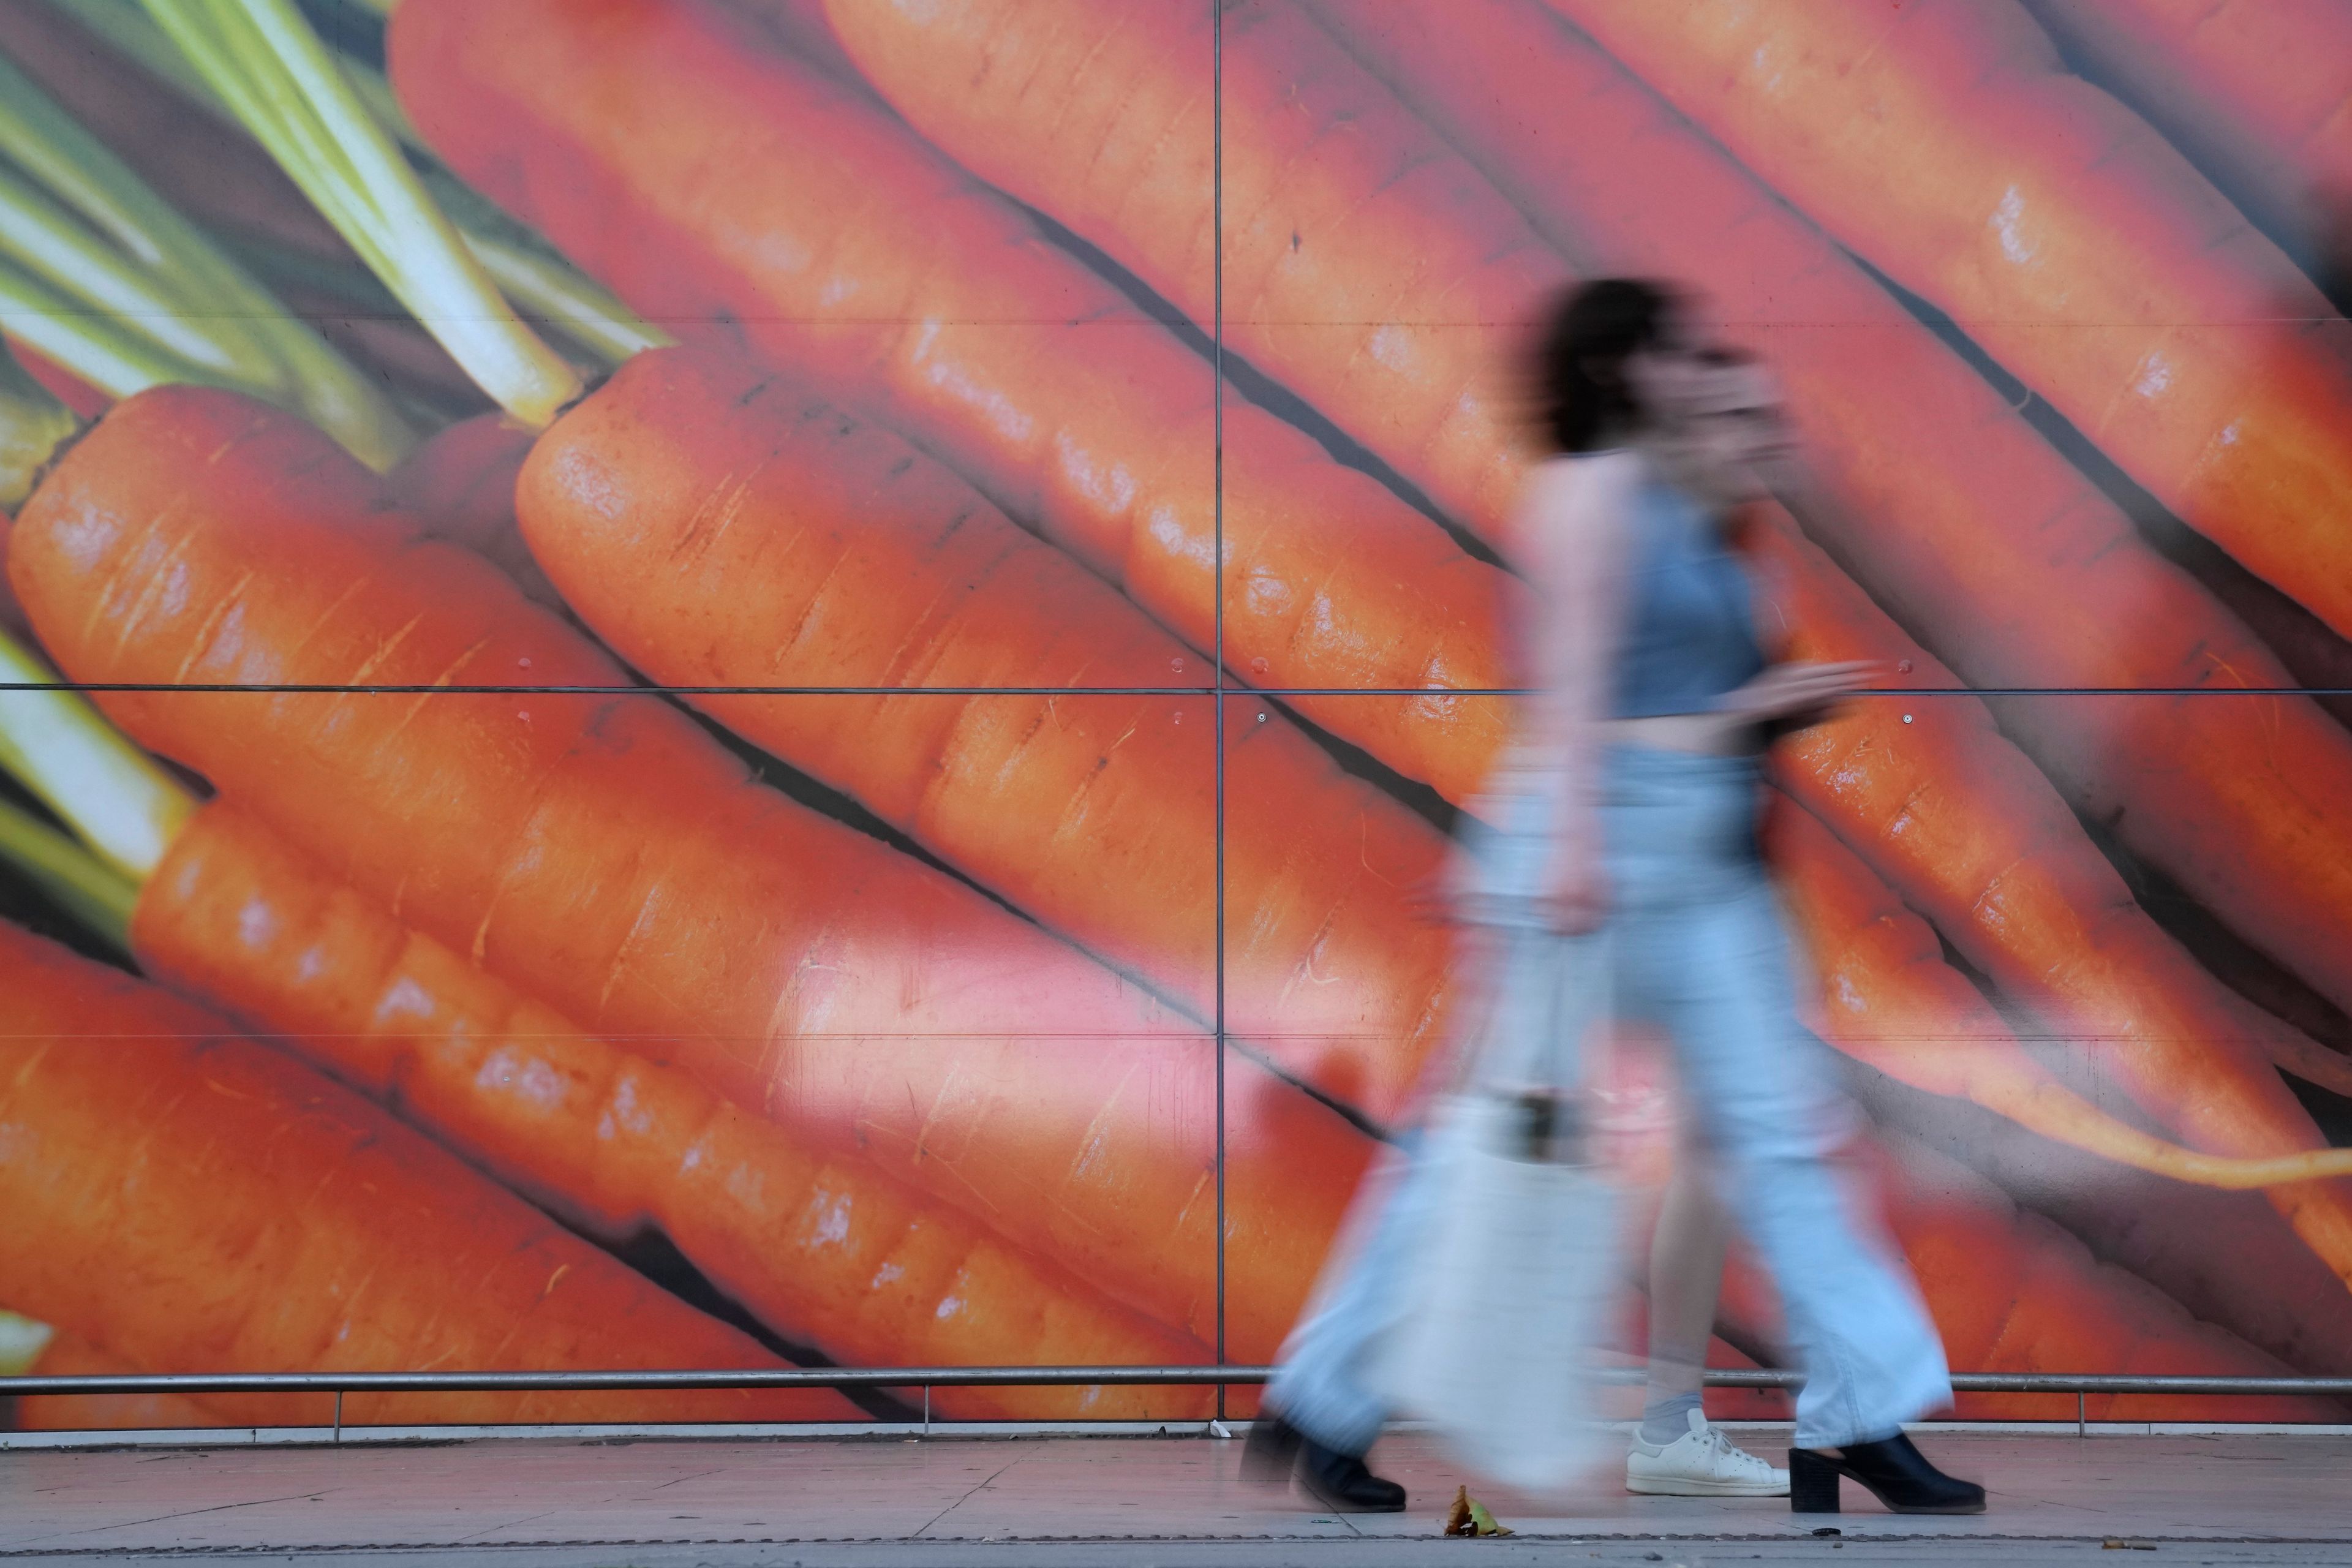 Shoppers walk past a large poster outside a supermarket in London, Saturday, June 10, 2023. High food prices are pinching households across Europe, where food inflation is outpacing other major economies like the U.S., Japan and Canada. Some governments have responded with formal price controls or loose agreements with supermarkets to keep costs down. (AP Photo/Alastair Grant)